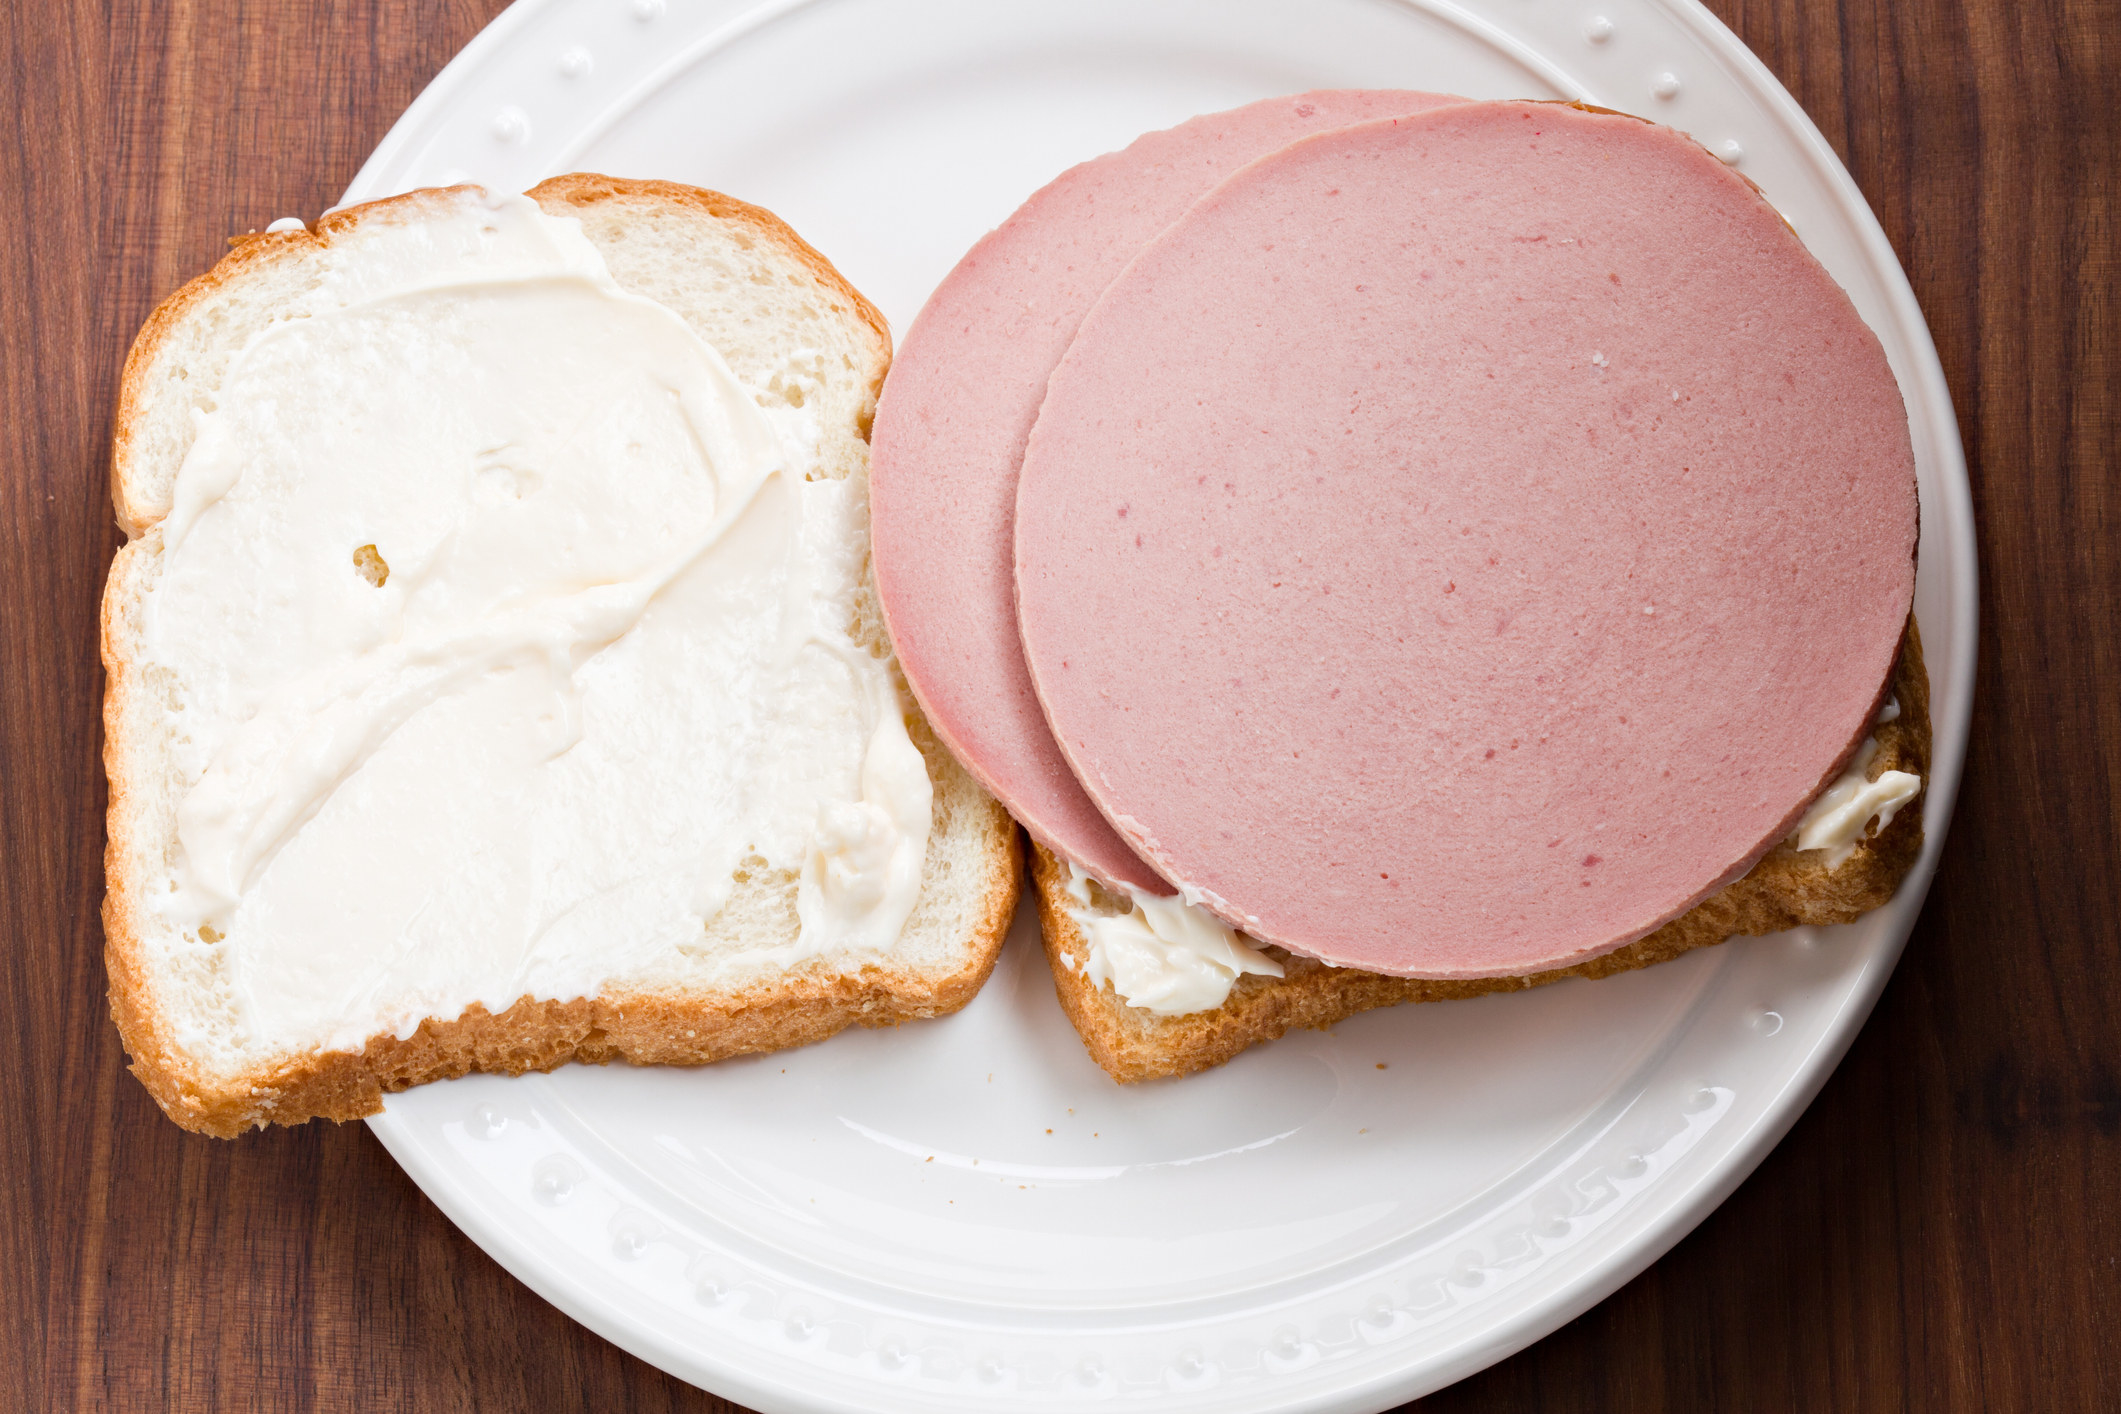 A Bologna sandwich on white bread with mayo.